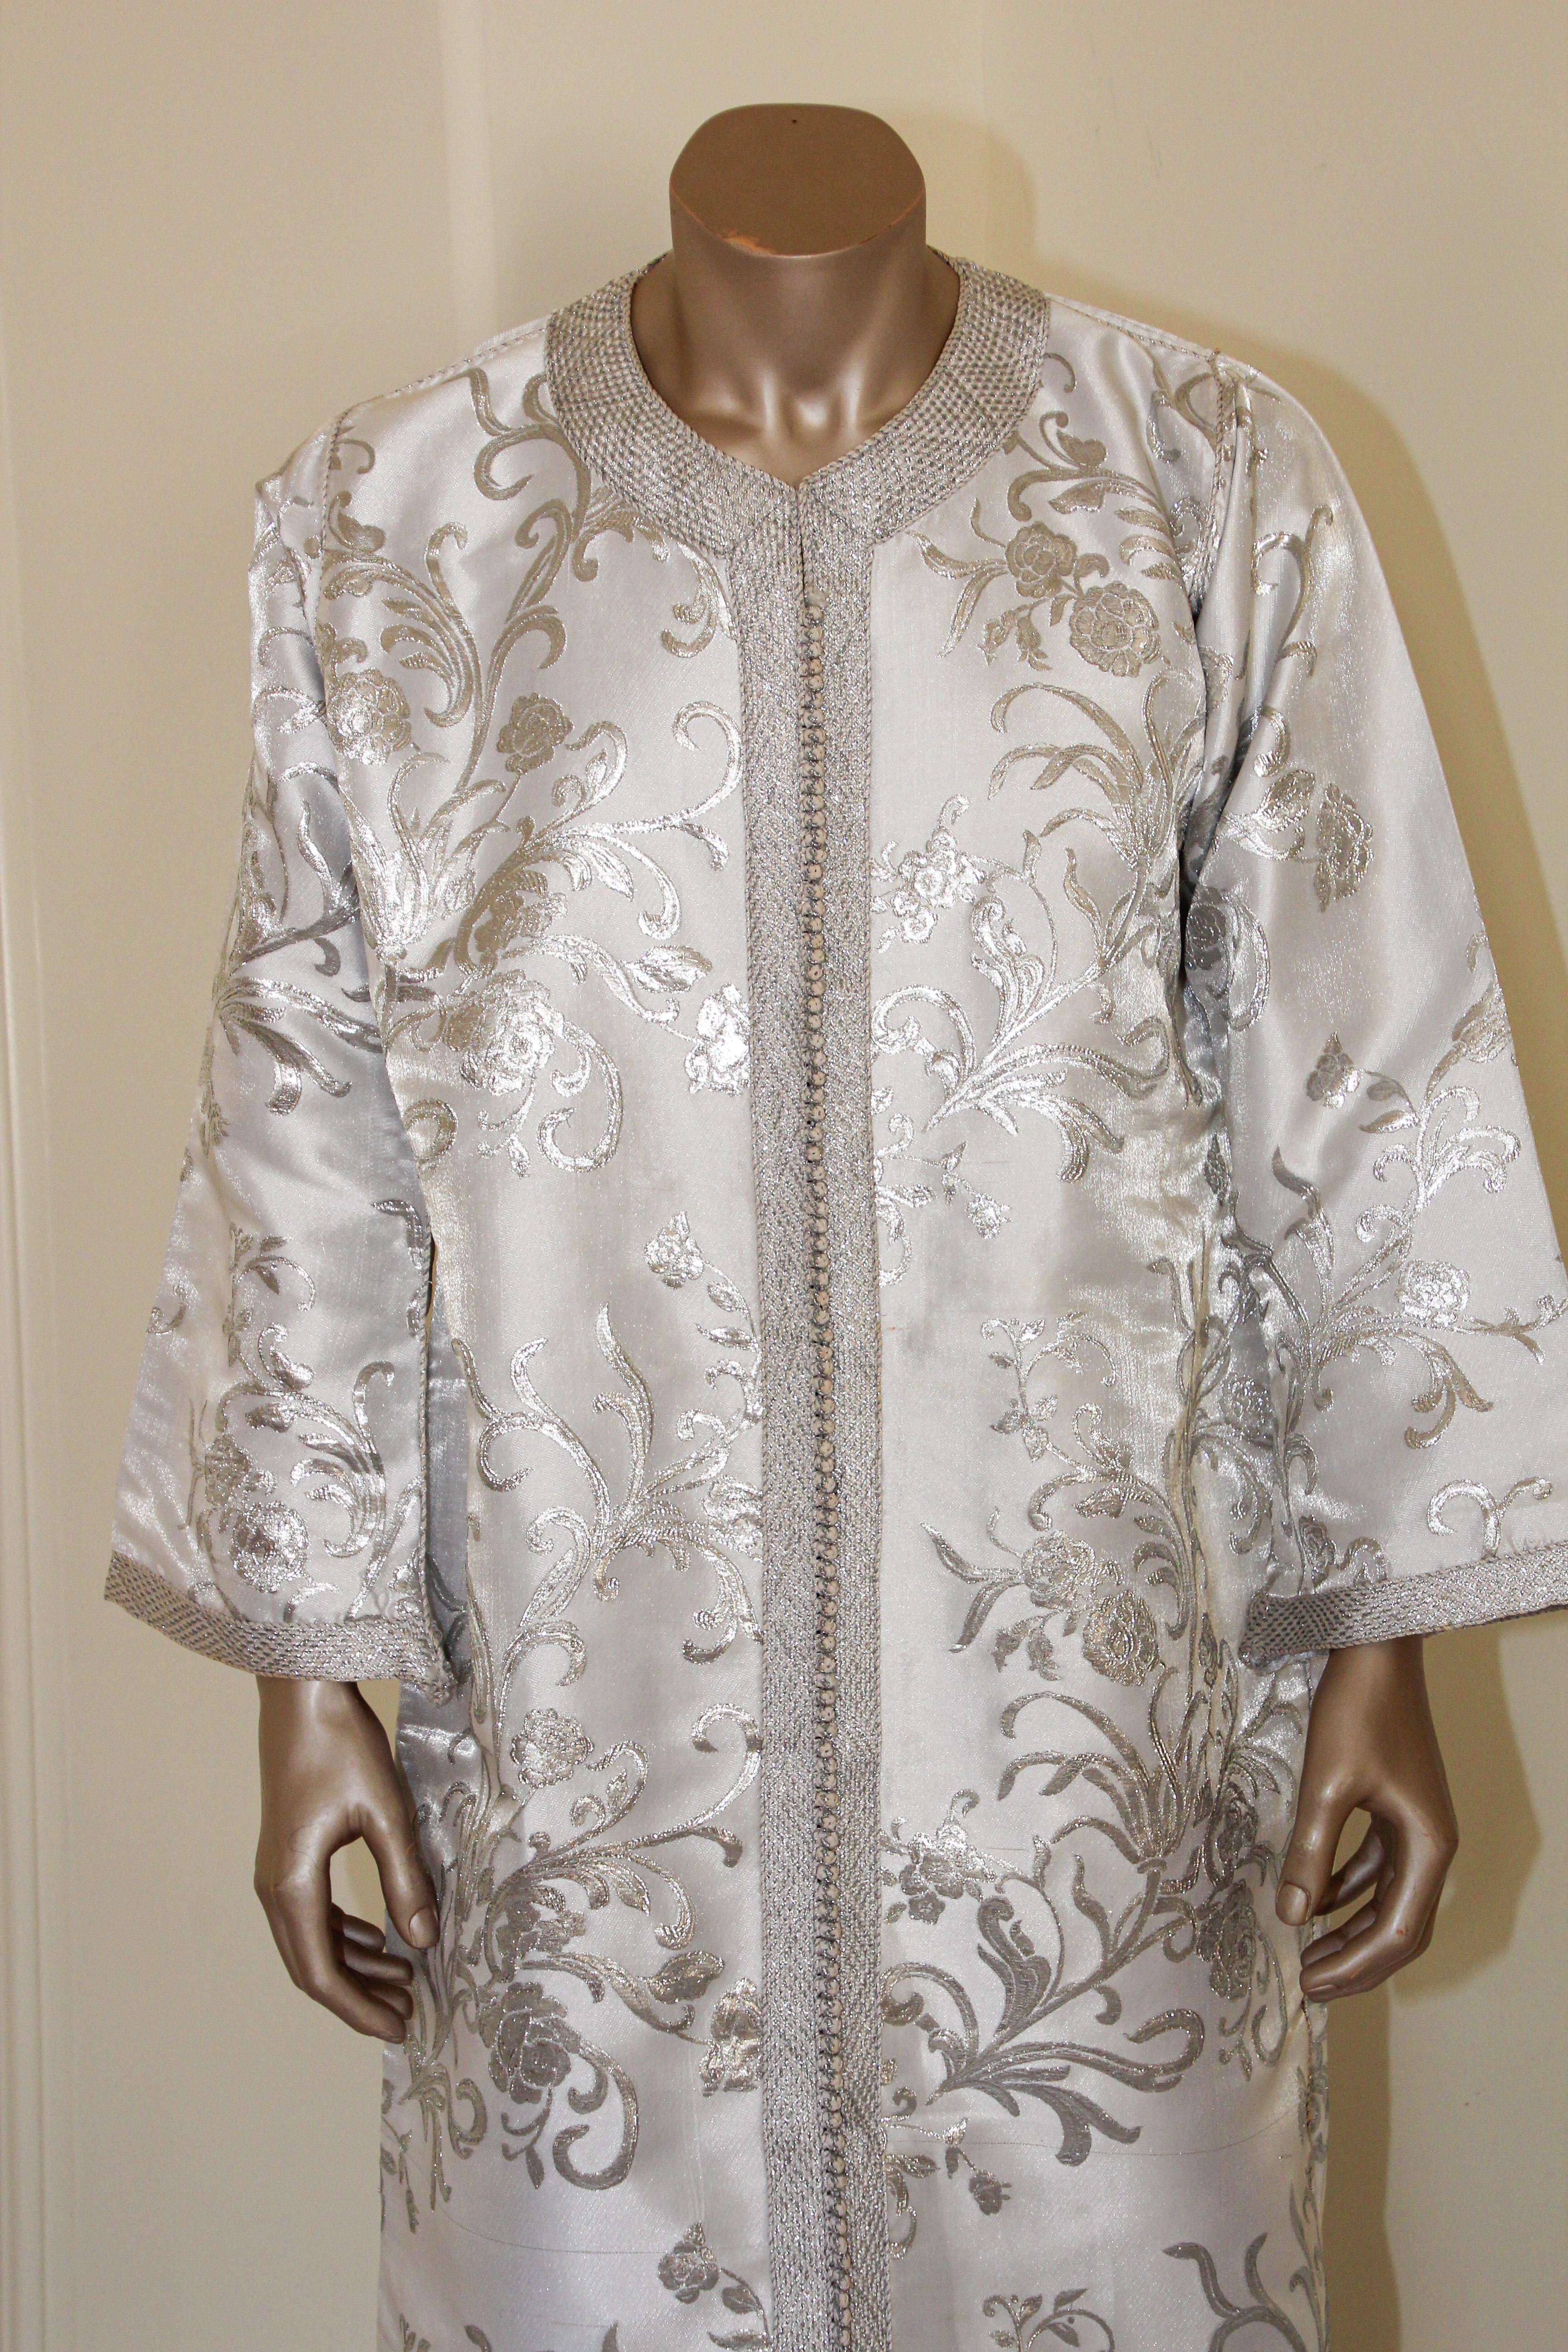 Elegant Moroccan gentleman silver damask fabric vintage caftan.
Moroccan vintage gentleman kaftan, circa 1970.
One of a kind custom Moroccan Middle Eastern gentleman vintage gown.
This vintage African kaftan features a traditional neckline, with